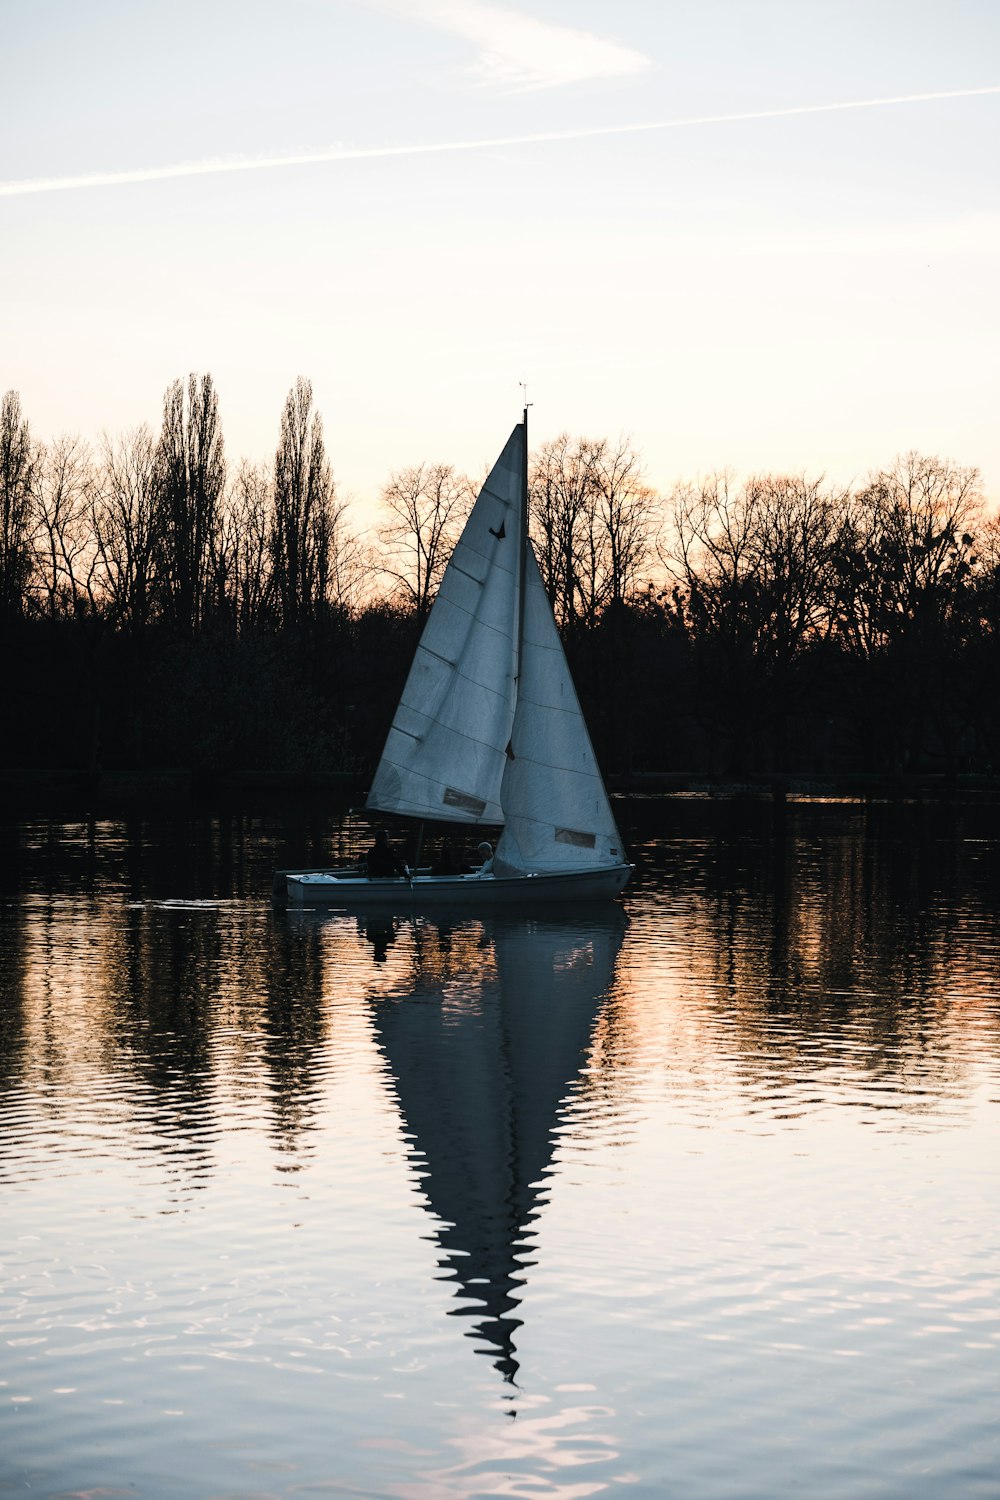 white sailboat on calm water during daytime